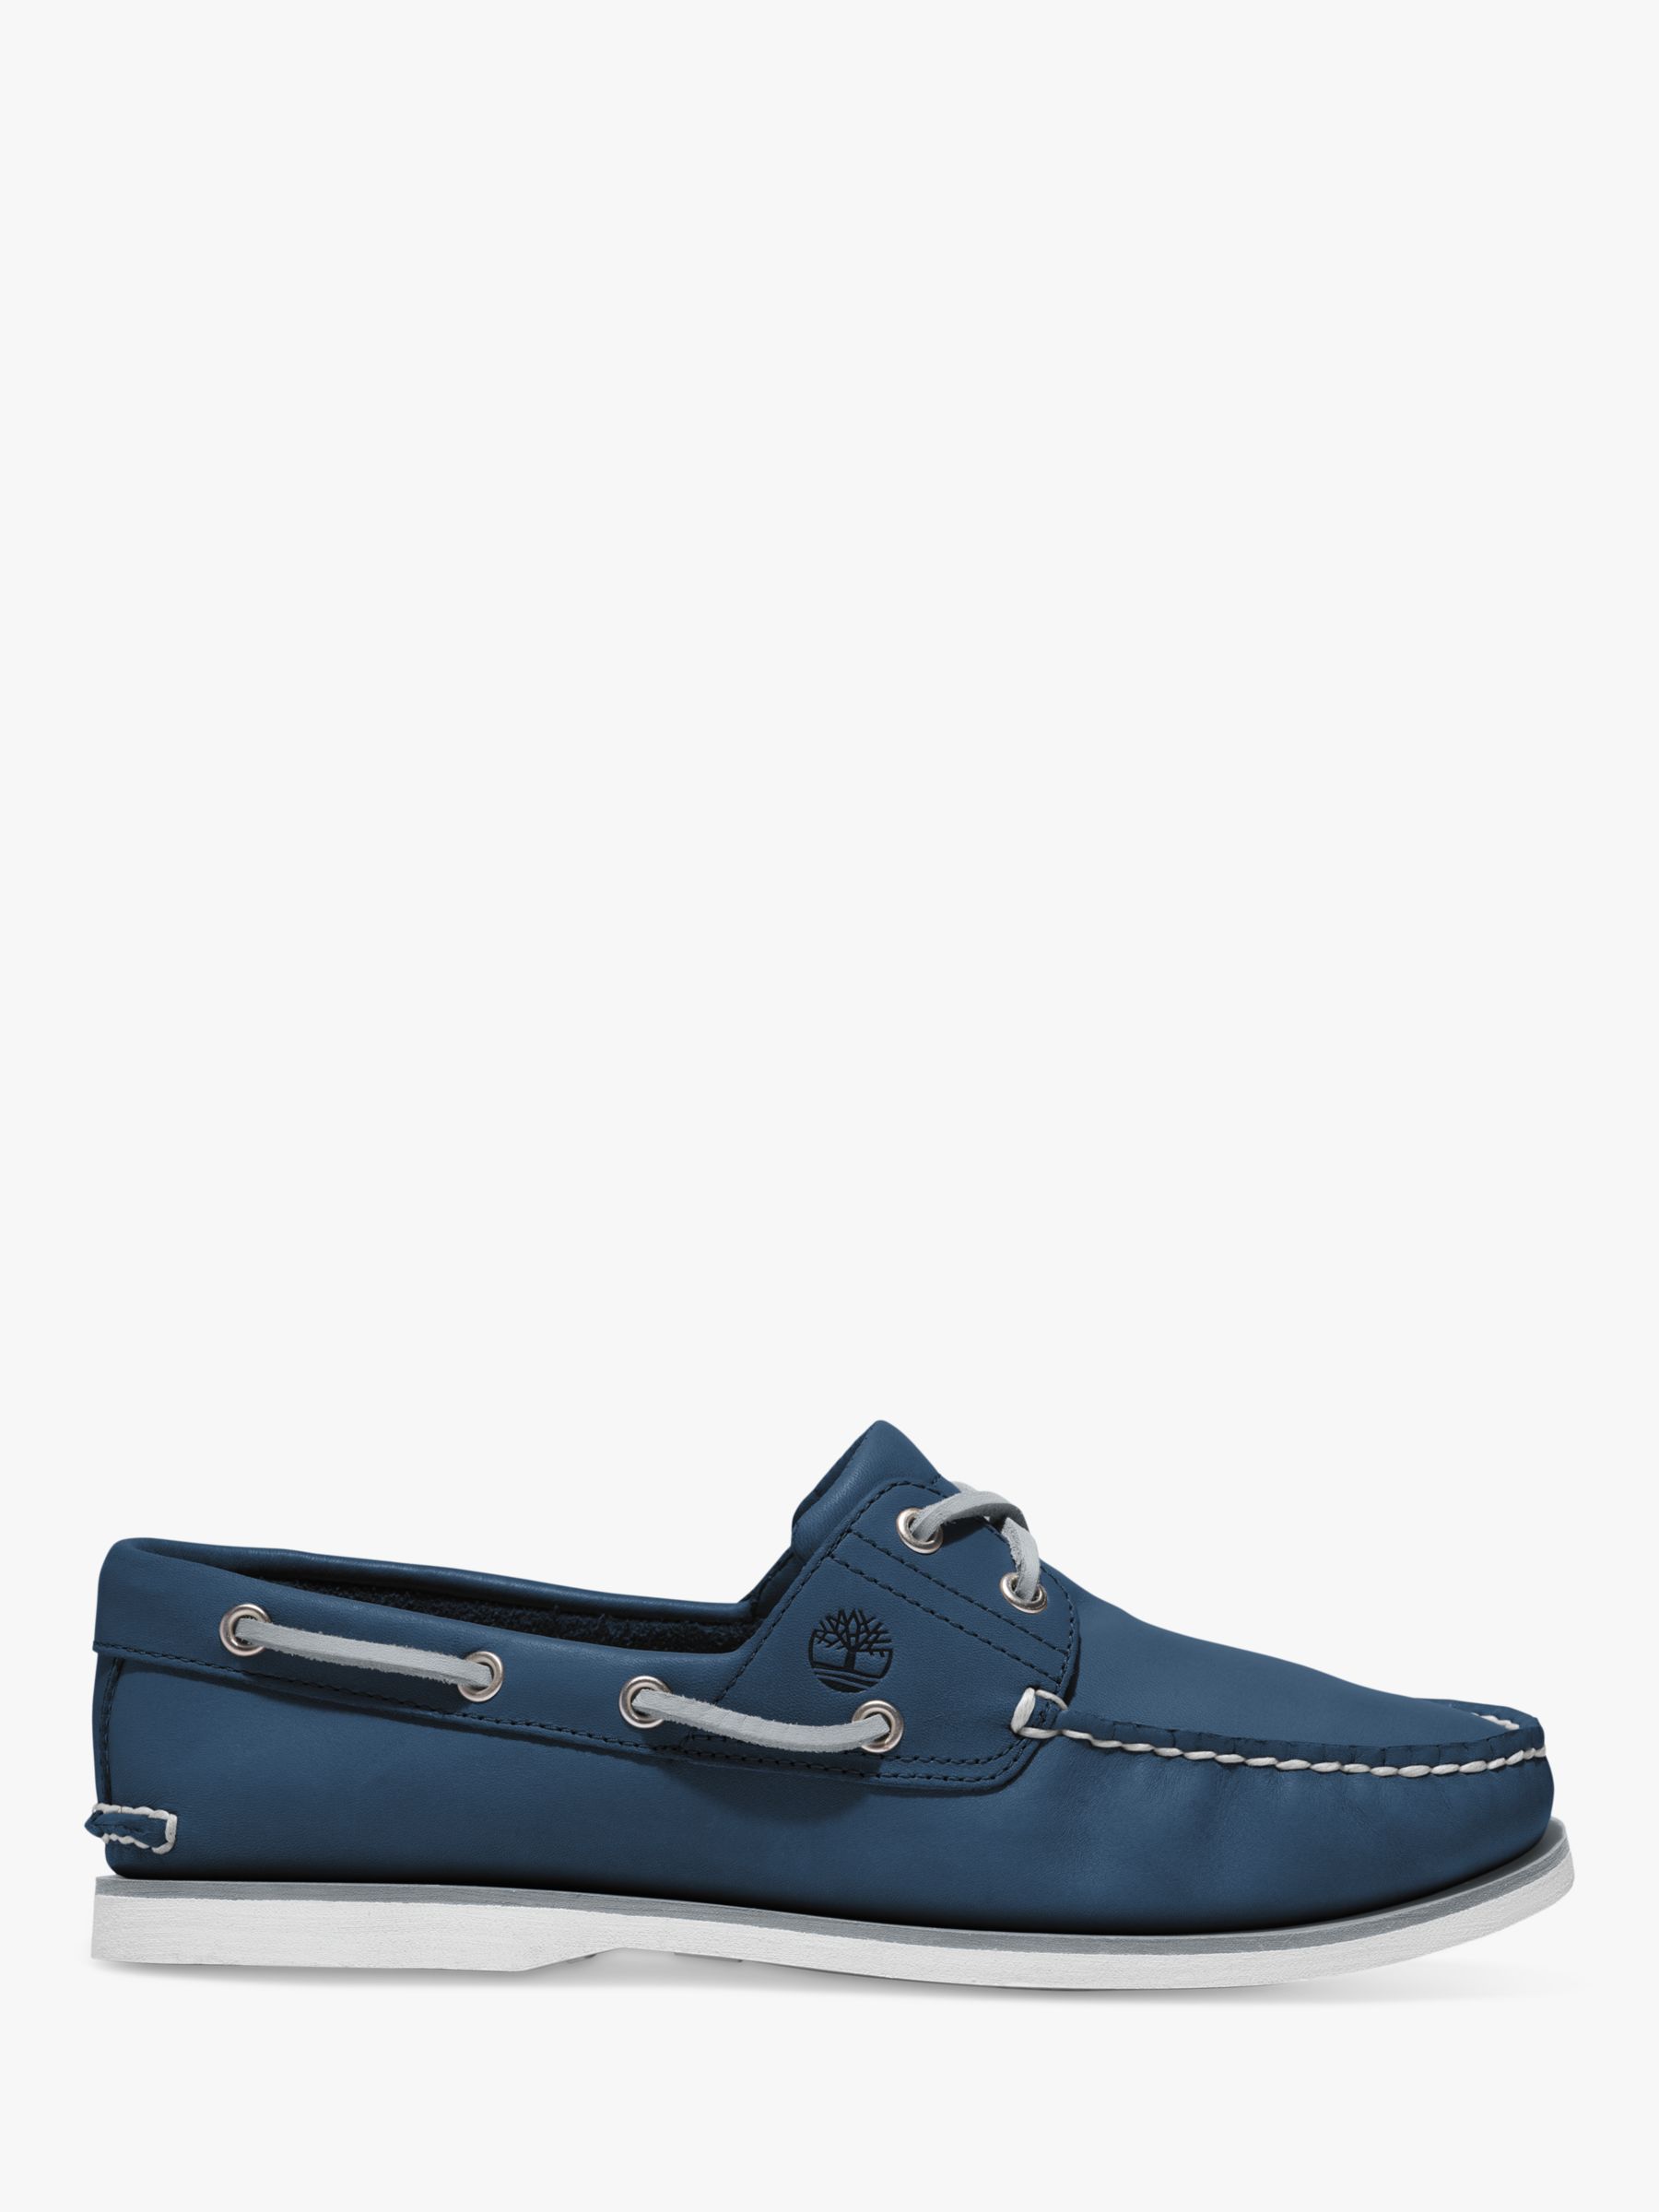 Timberland Classic 2 Eye Boat Shoes, Blue at John Lewis & Partners